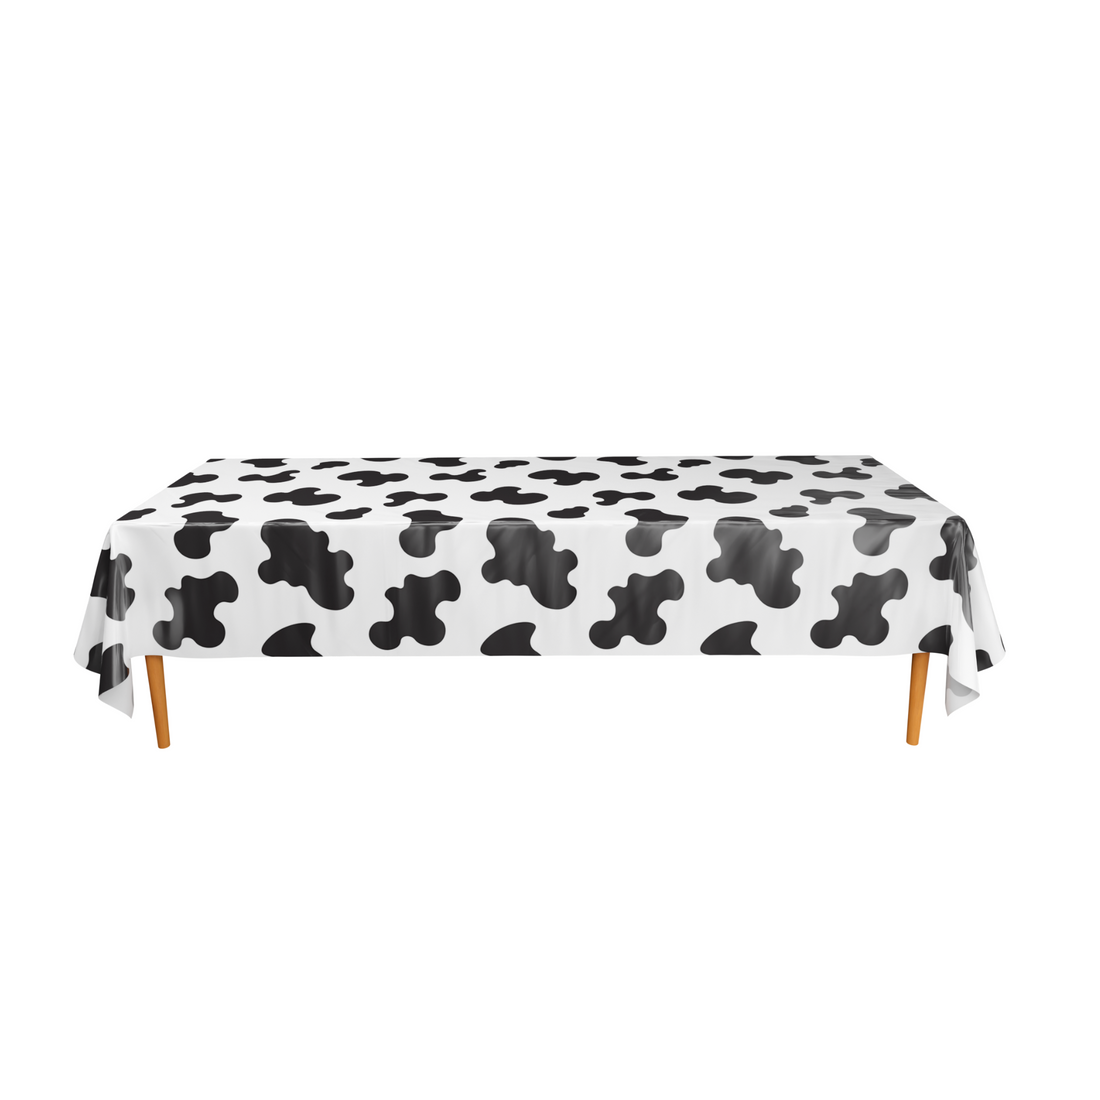 Moo-ve Over Boring Tablecloths: Spice up your Party with Cow Table Covers!